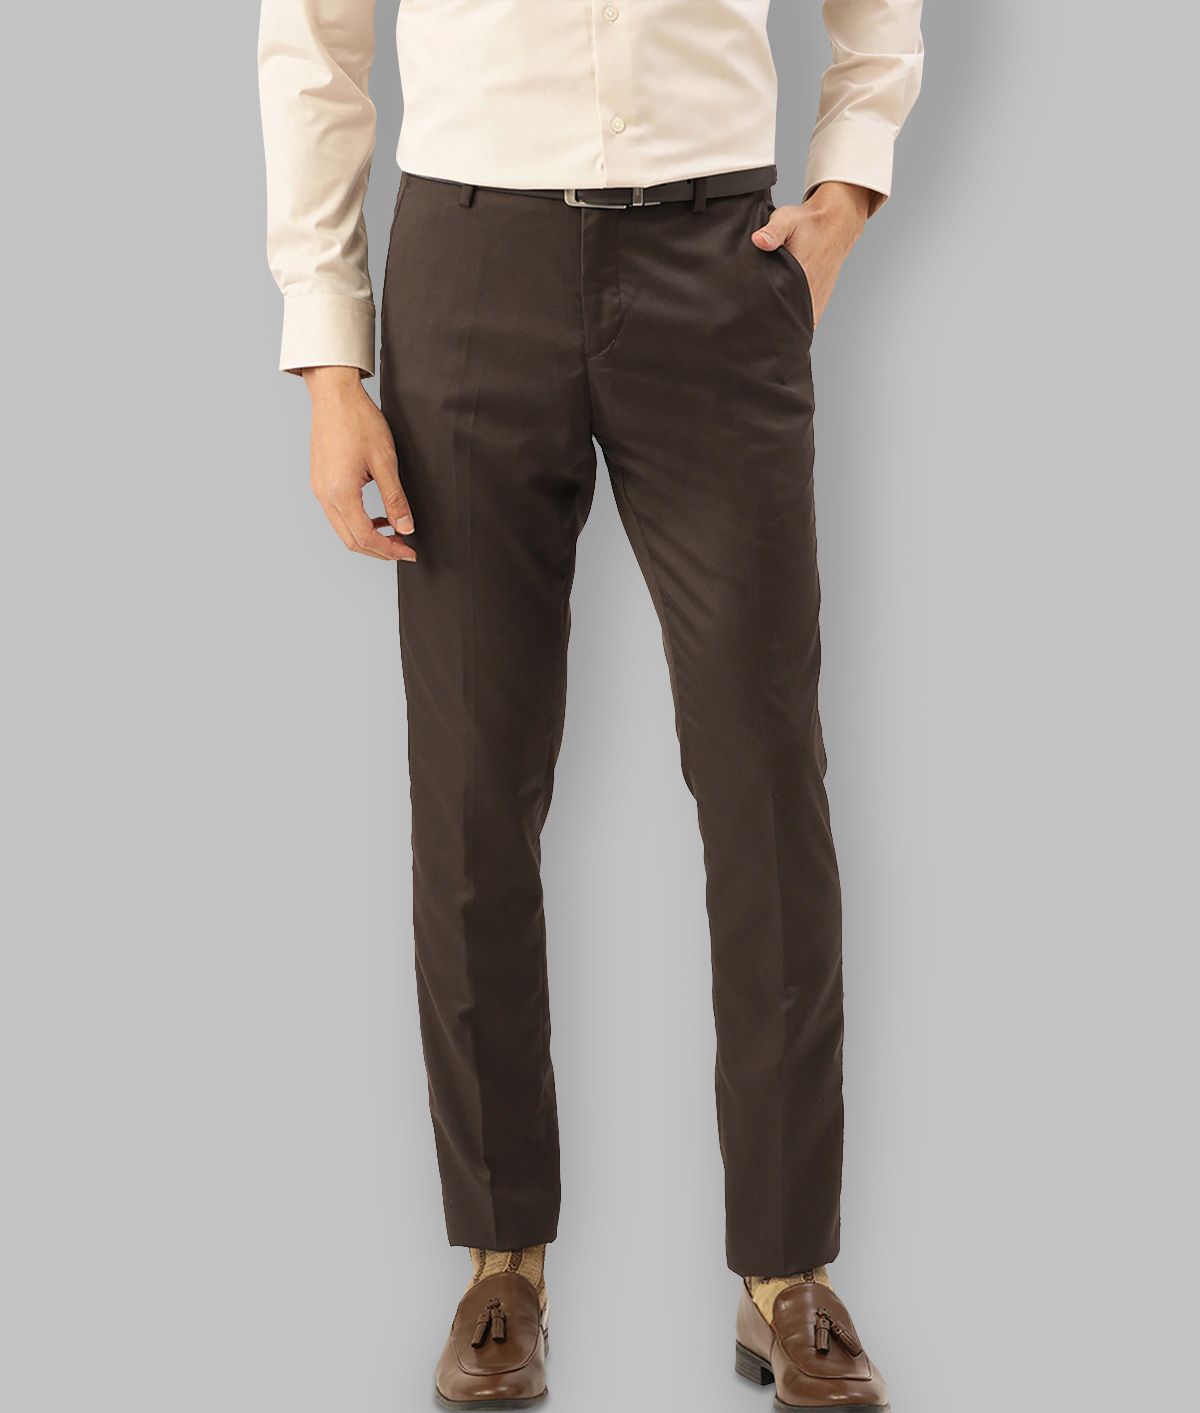     			Haul Chic - Brown Polycotton Slim - Fit Men's Chinos ( Pack of 1 )